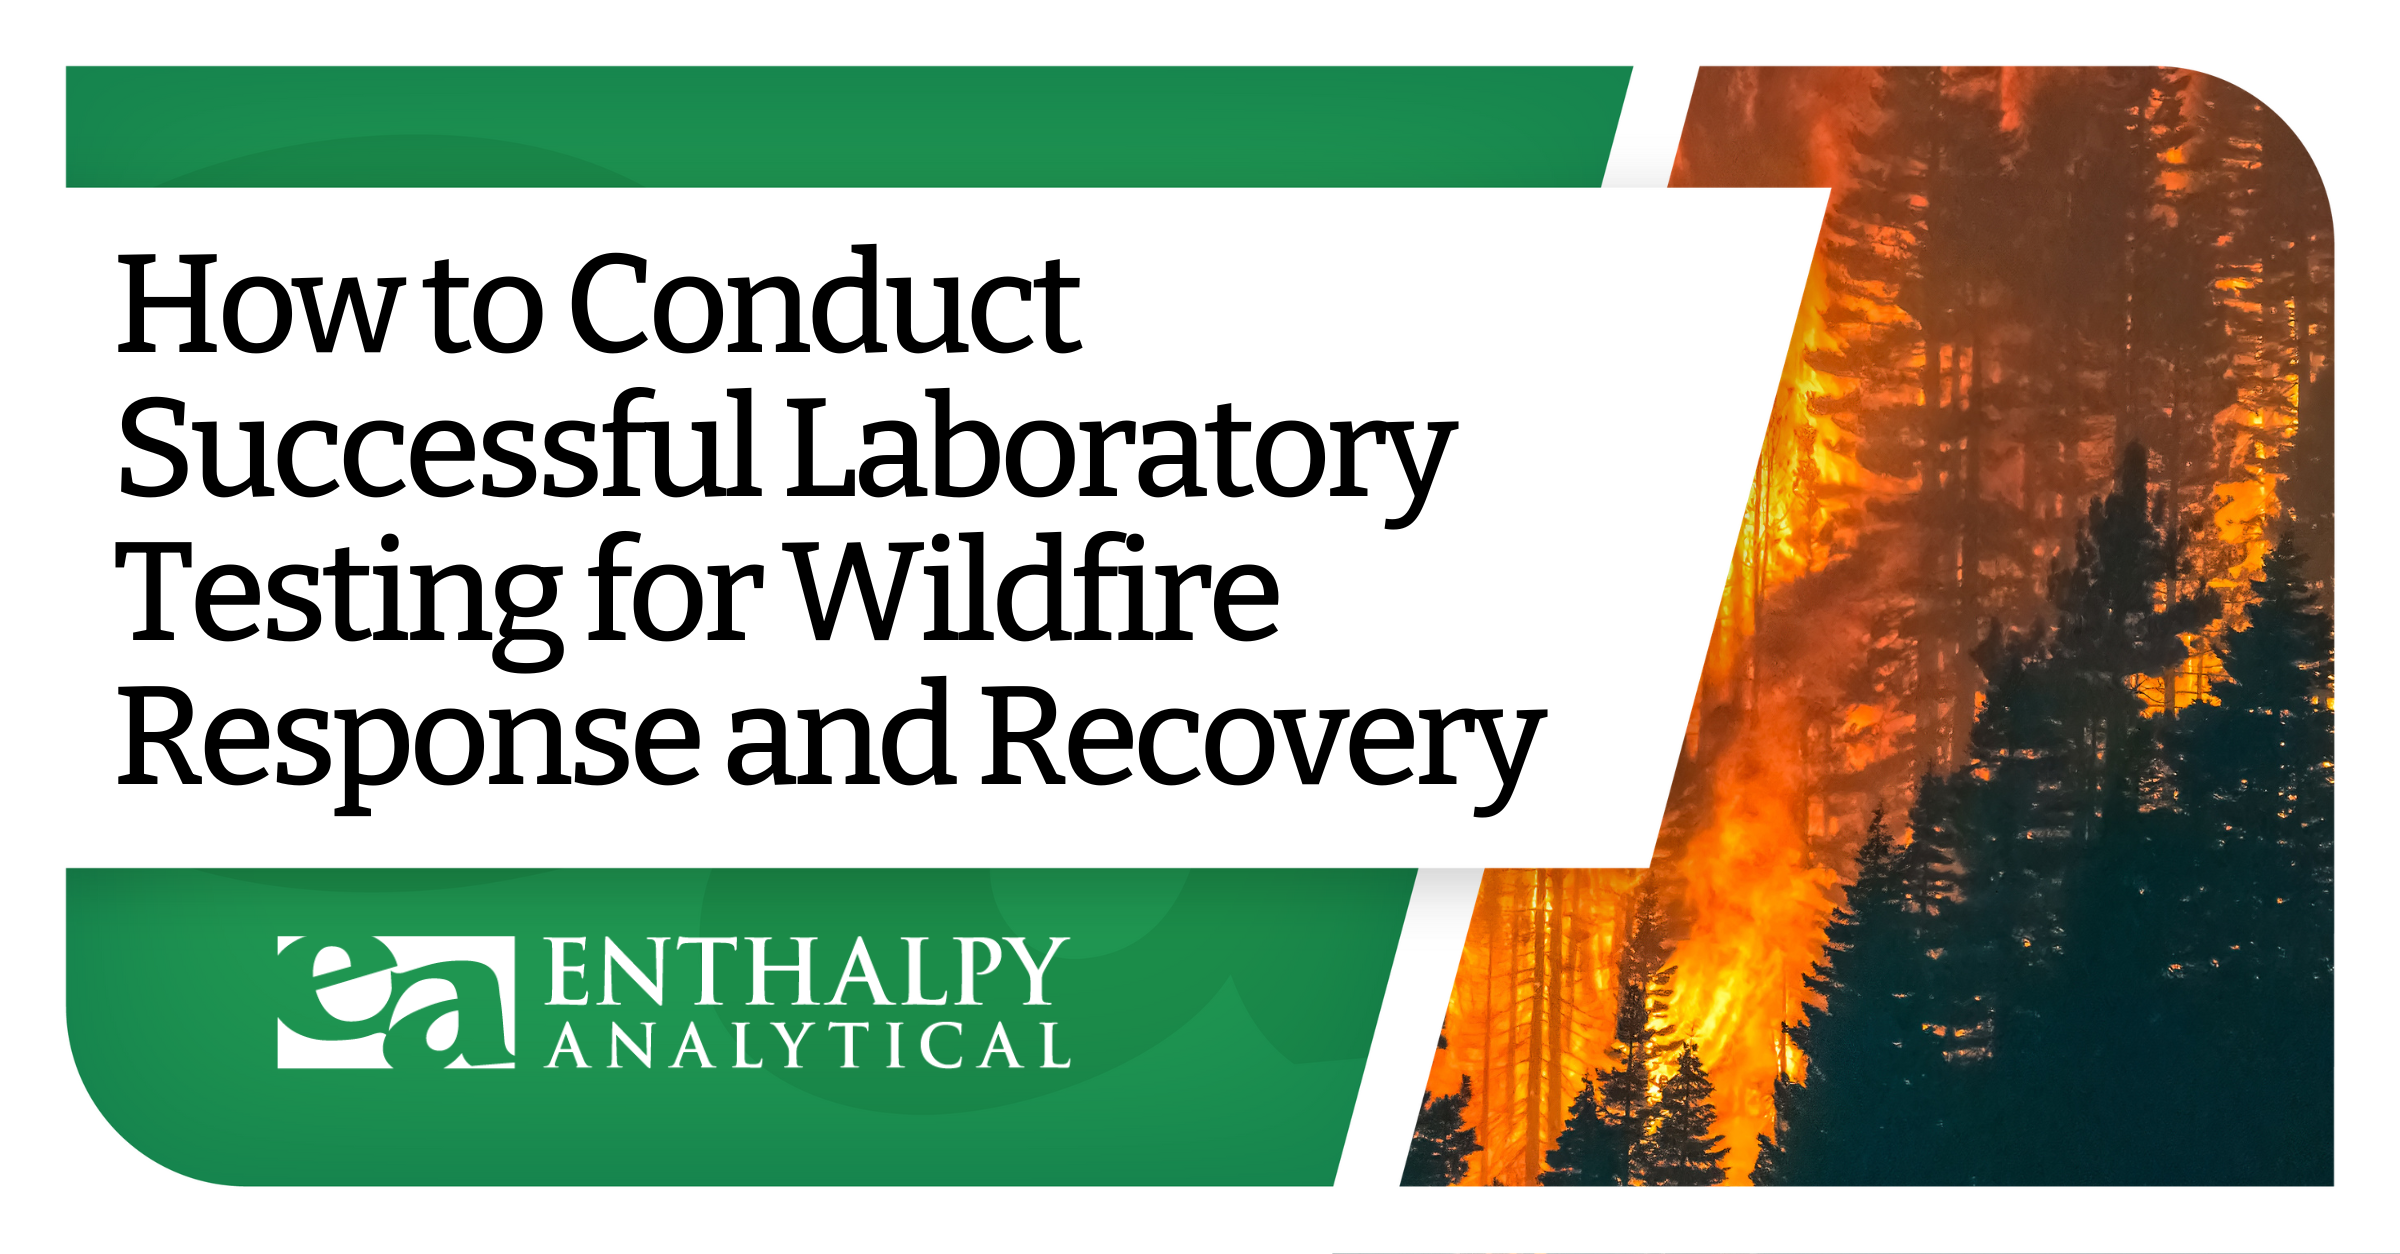 How-to-Conduct-Successful-Laboratory-Testing-for-Wildfire-Response-and-Recovery